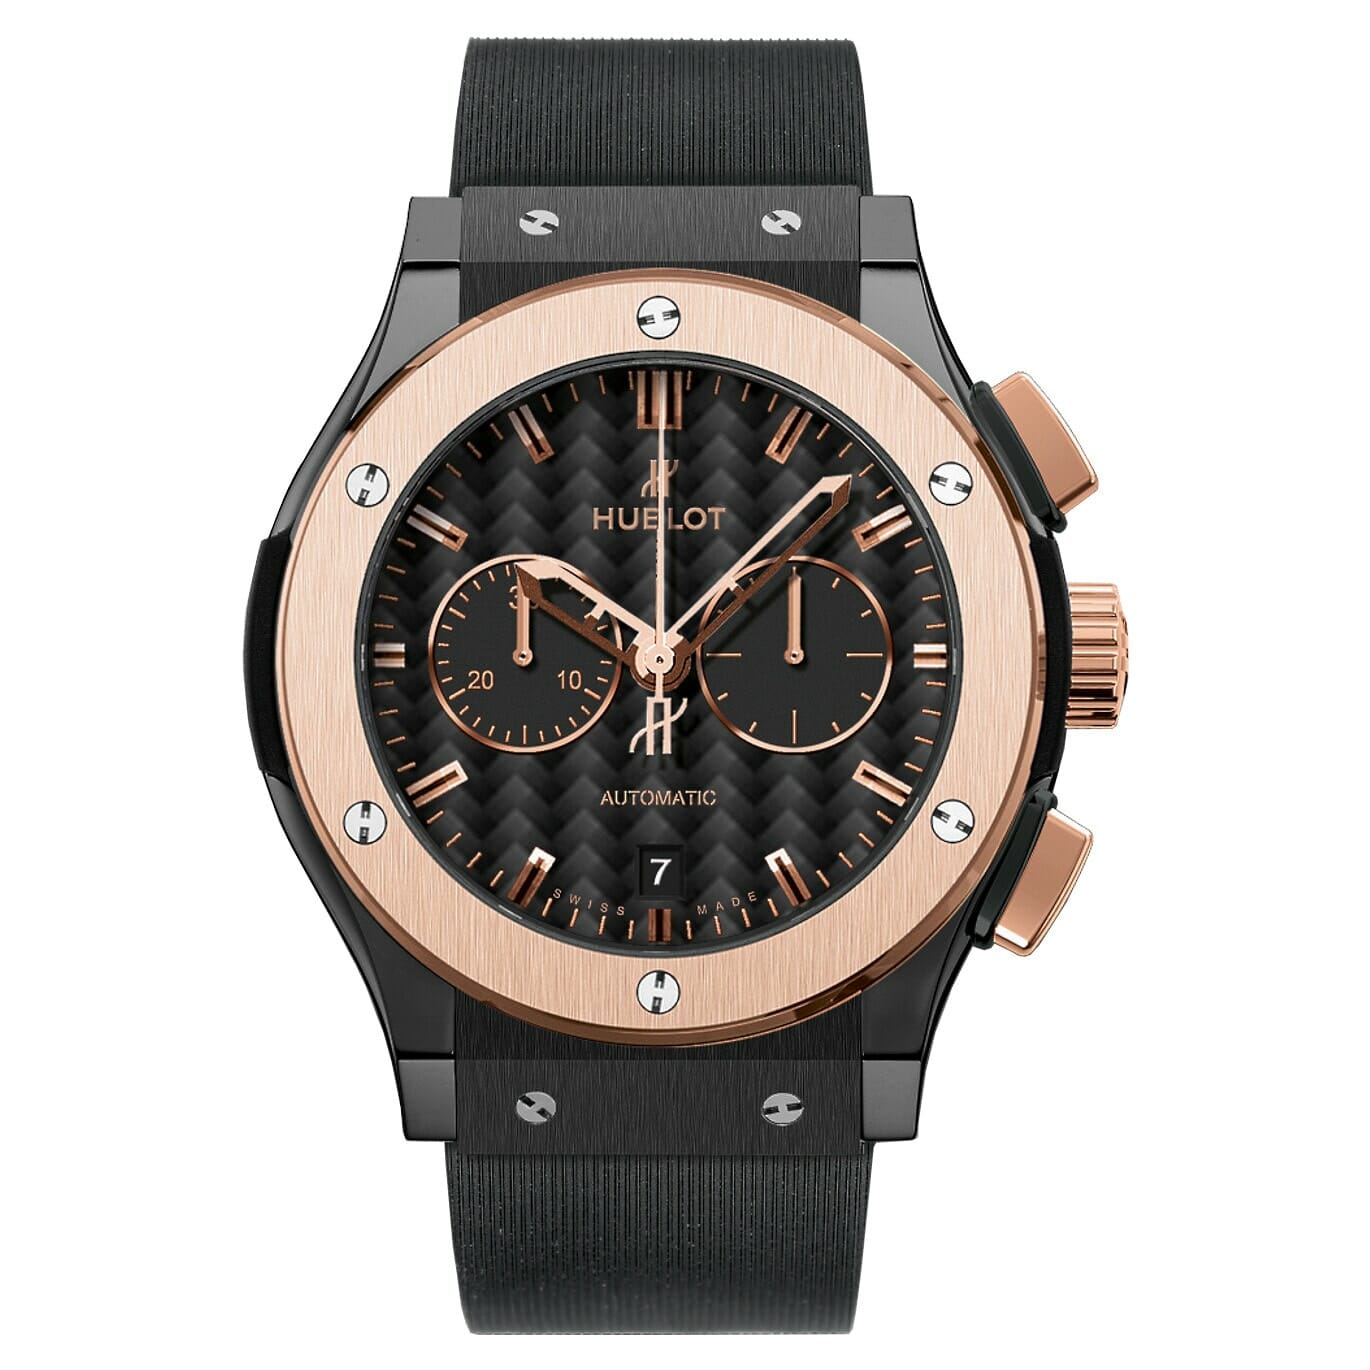 Hublot Classic Fusion Chronograph Ceramic and King Gold 521.CO.1780.RX